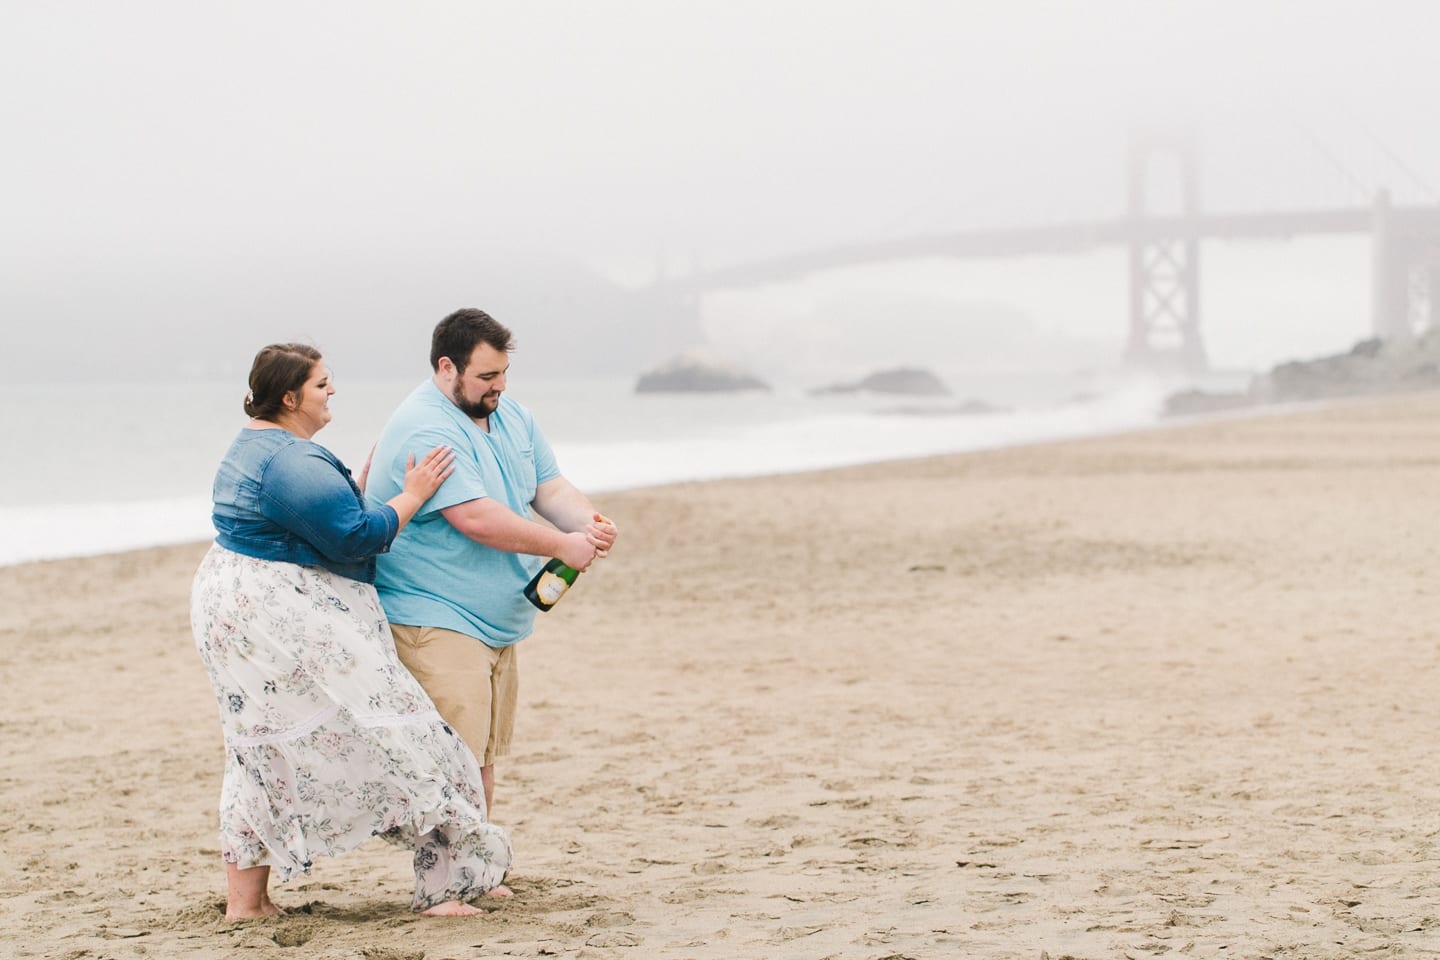 palace_of_fine_arts_bakers_beach_engagement_020.jpg